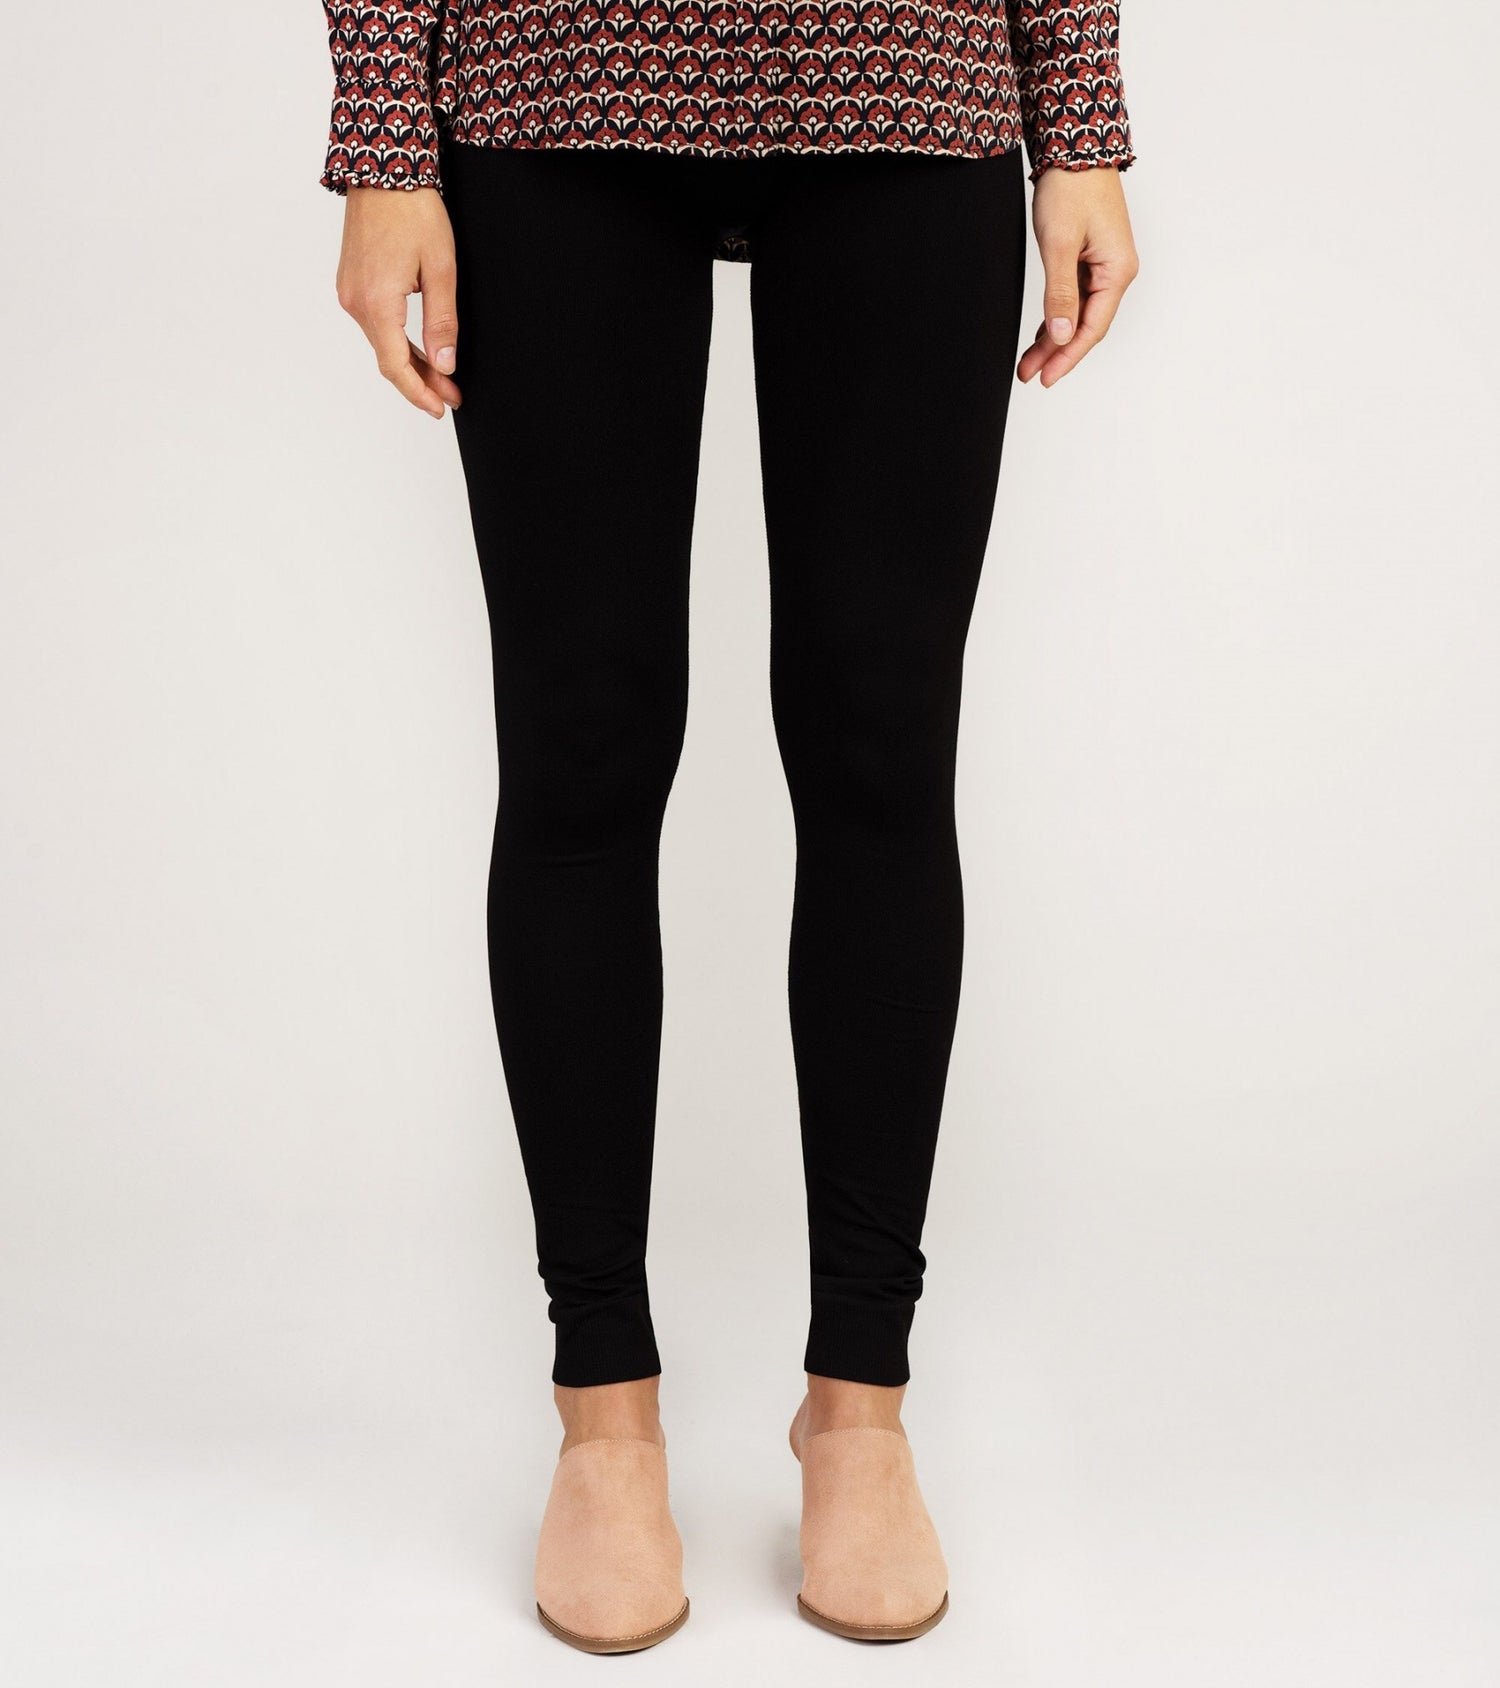 Hatley Black Seamless Leggings - Sands Boutique clothing and gifts